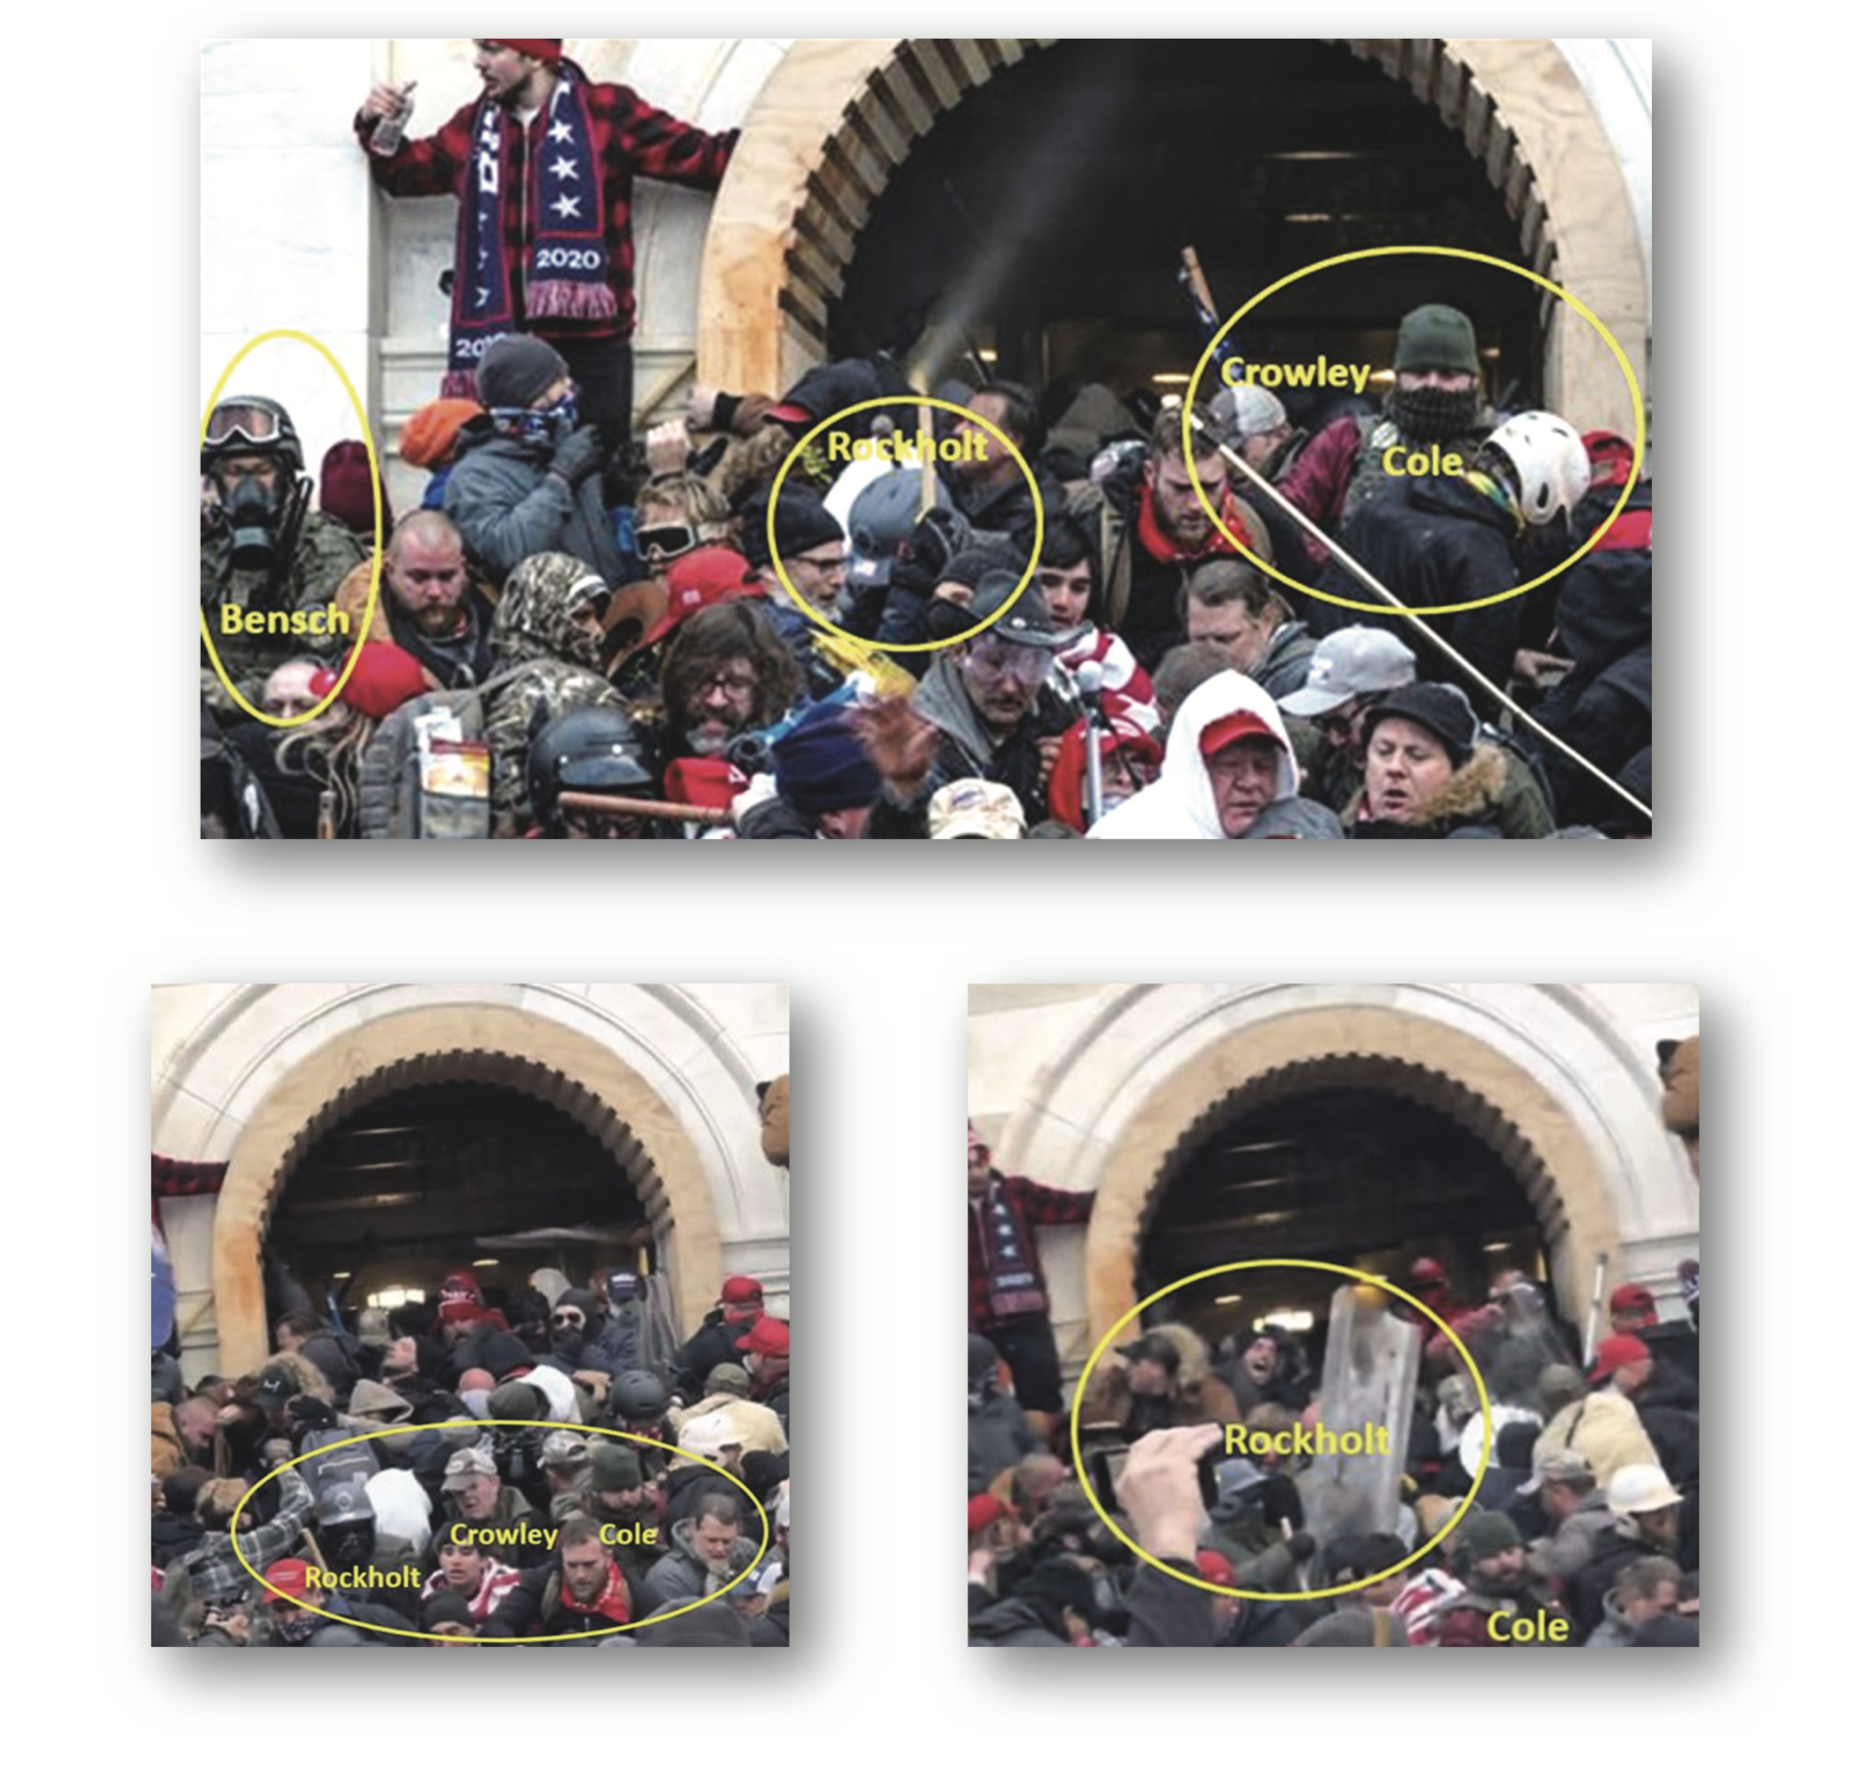 The suspects during the Jan. 6 breach of the Capitol. Images from court documents